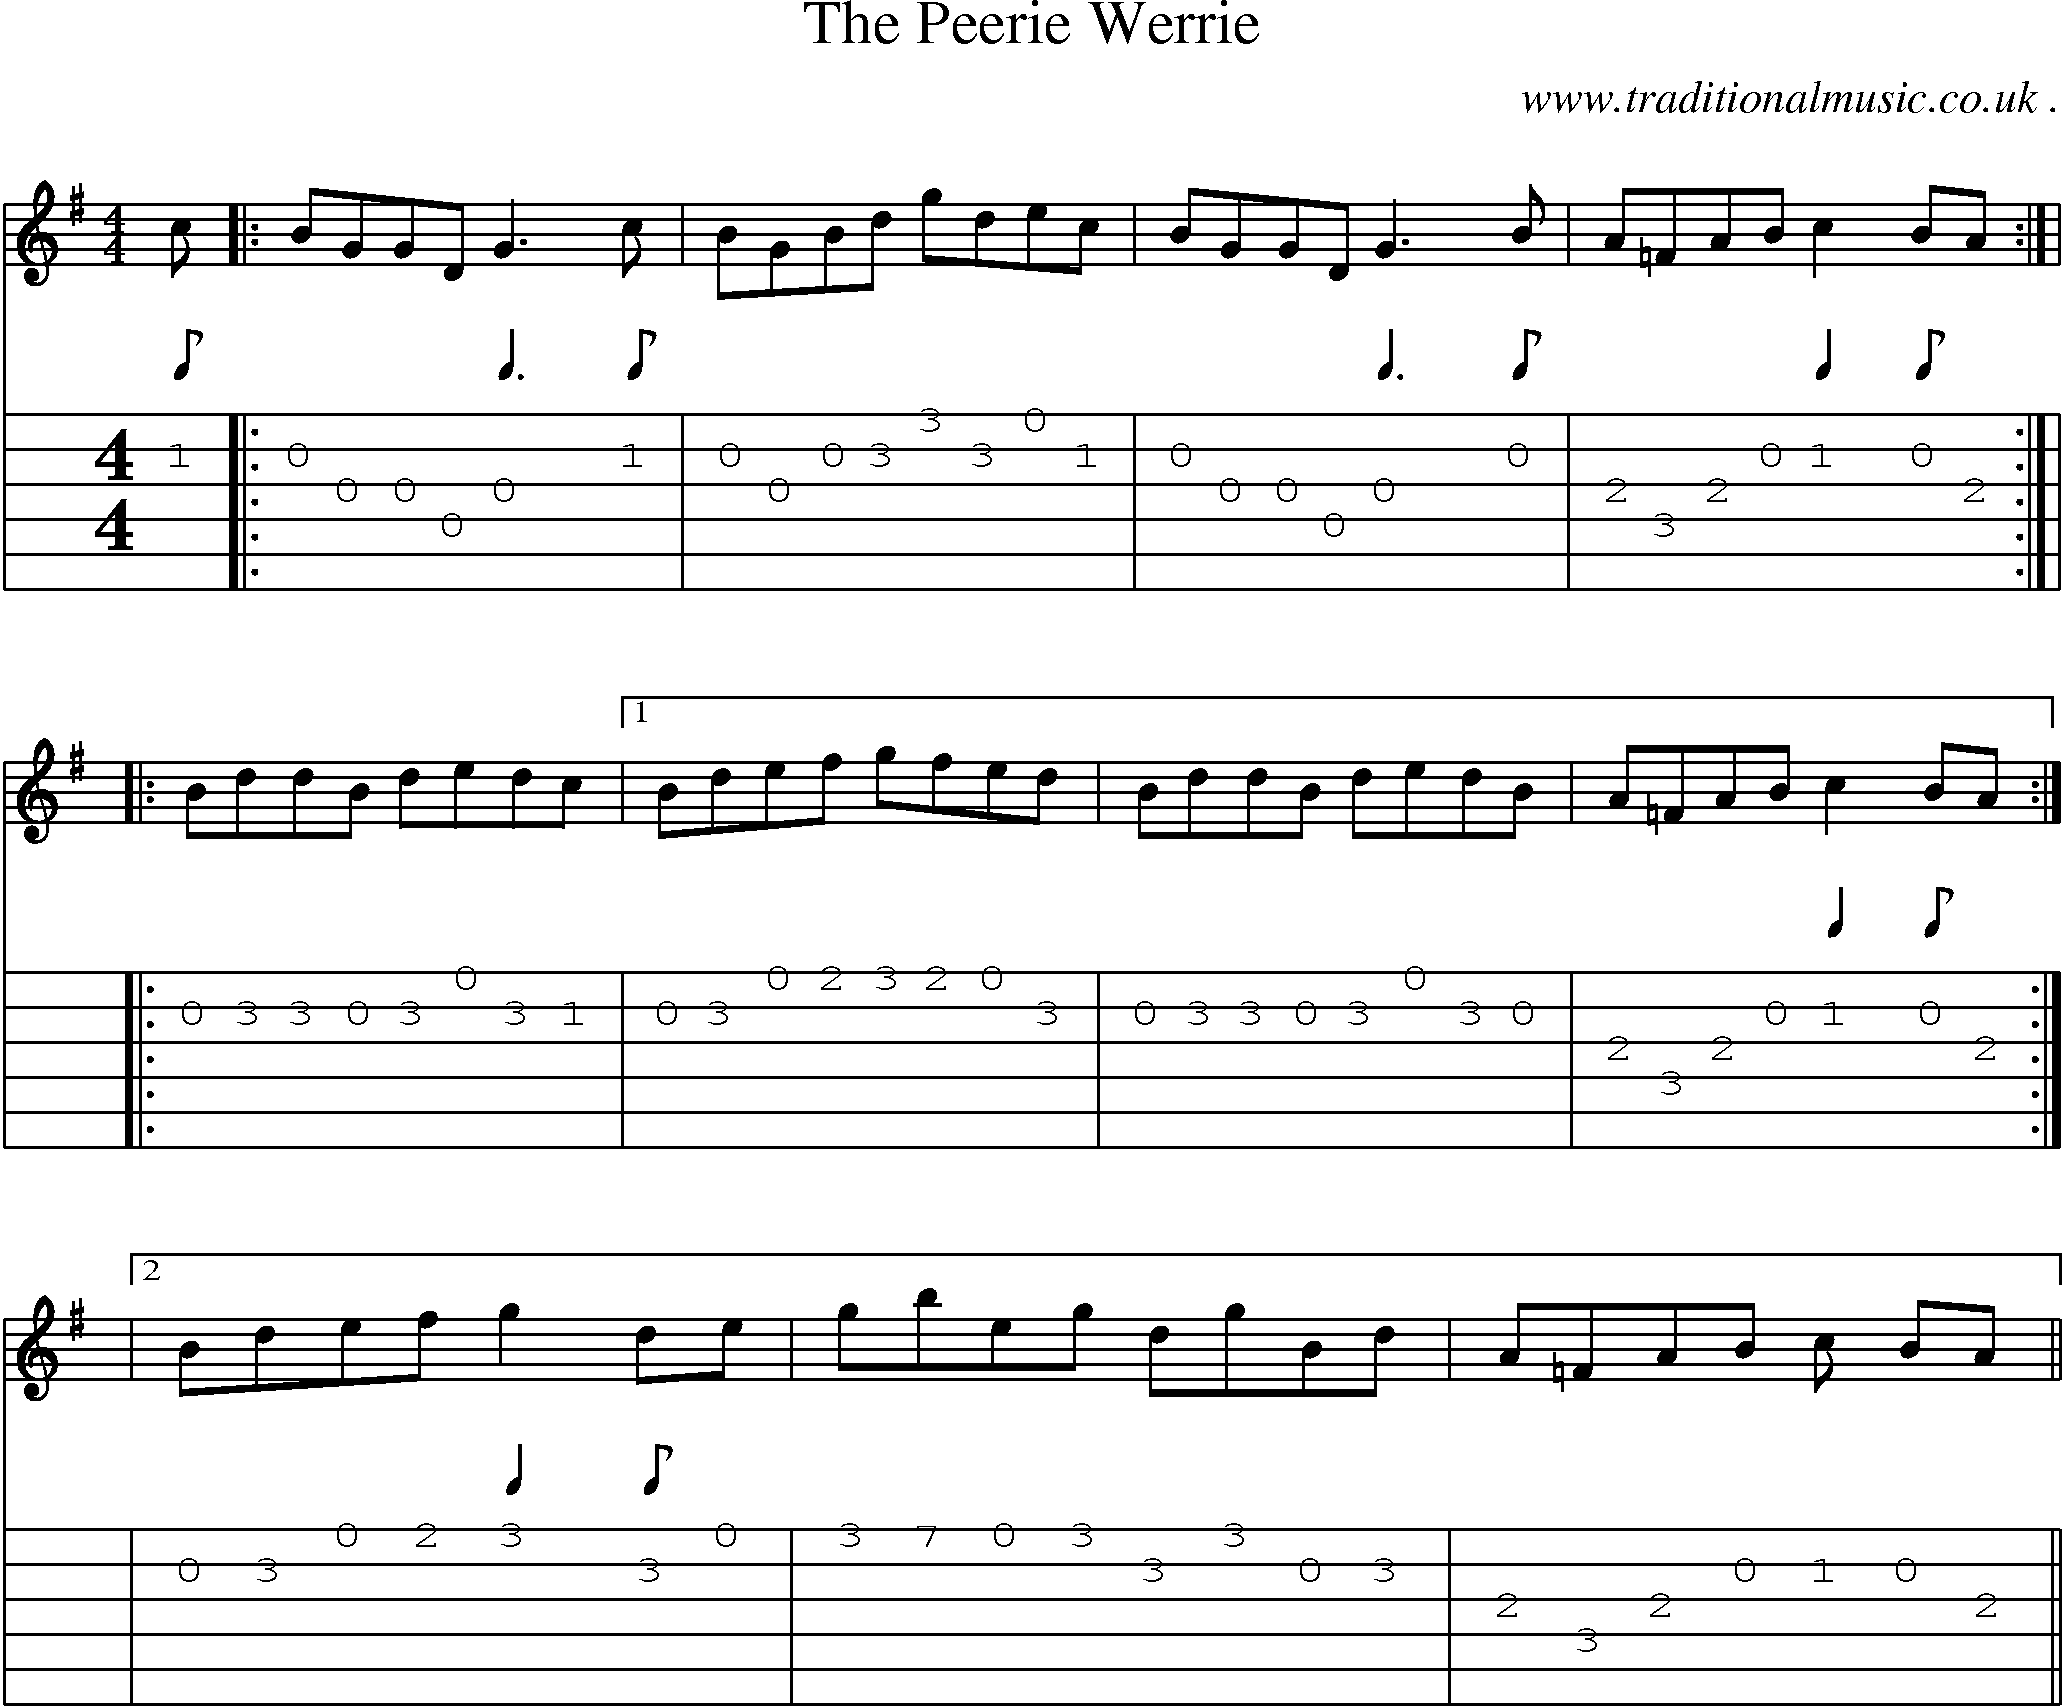 Sheet-Music and Guitar Tabs for The Peerie Werrie